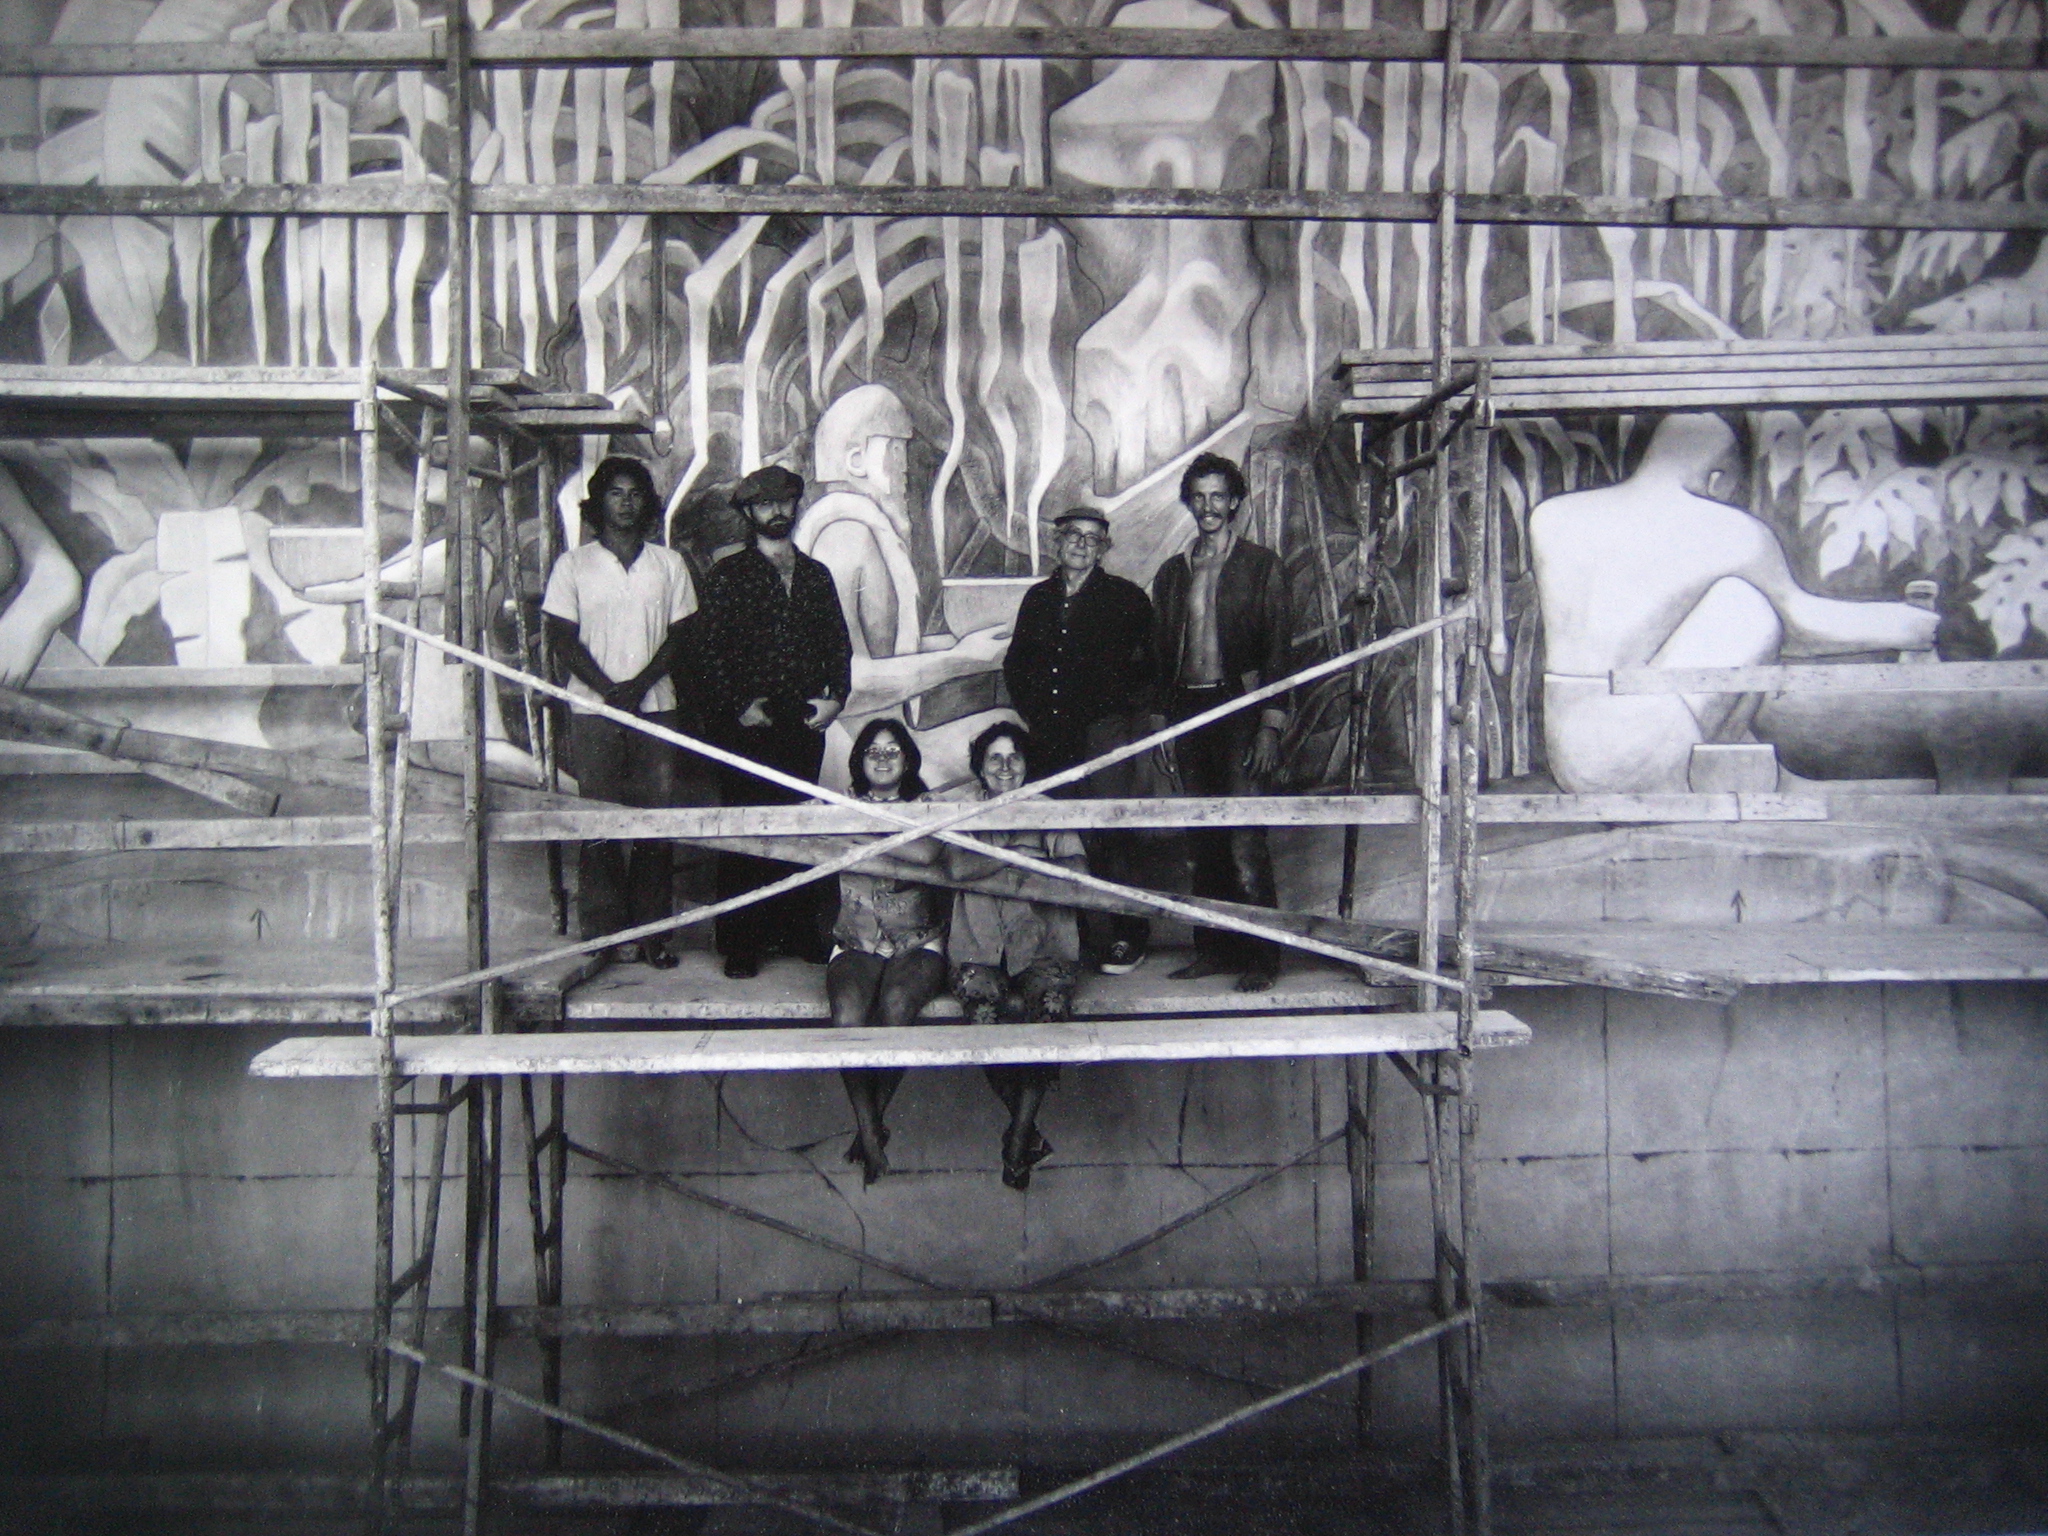 Execution of mural.  The Relation of Man and Nature in Old Hawaiʻi.  Jean Charlot.  1974.  Six people, Jean Charlot second from rightside of platform.